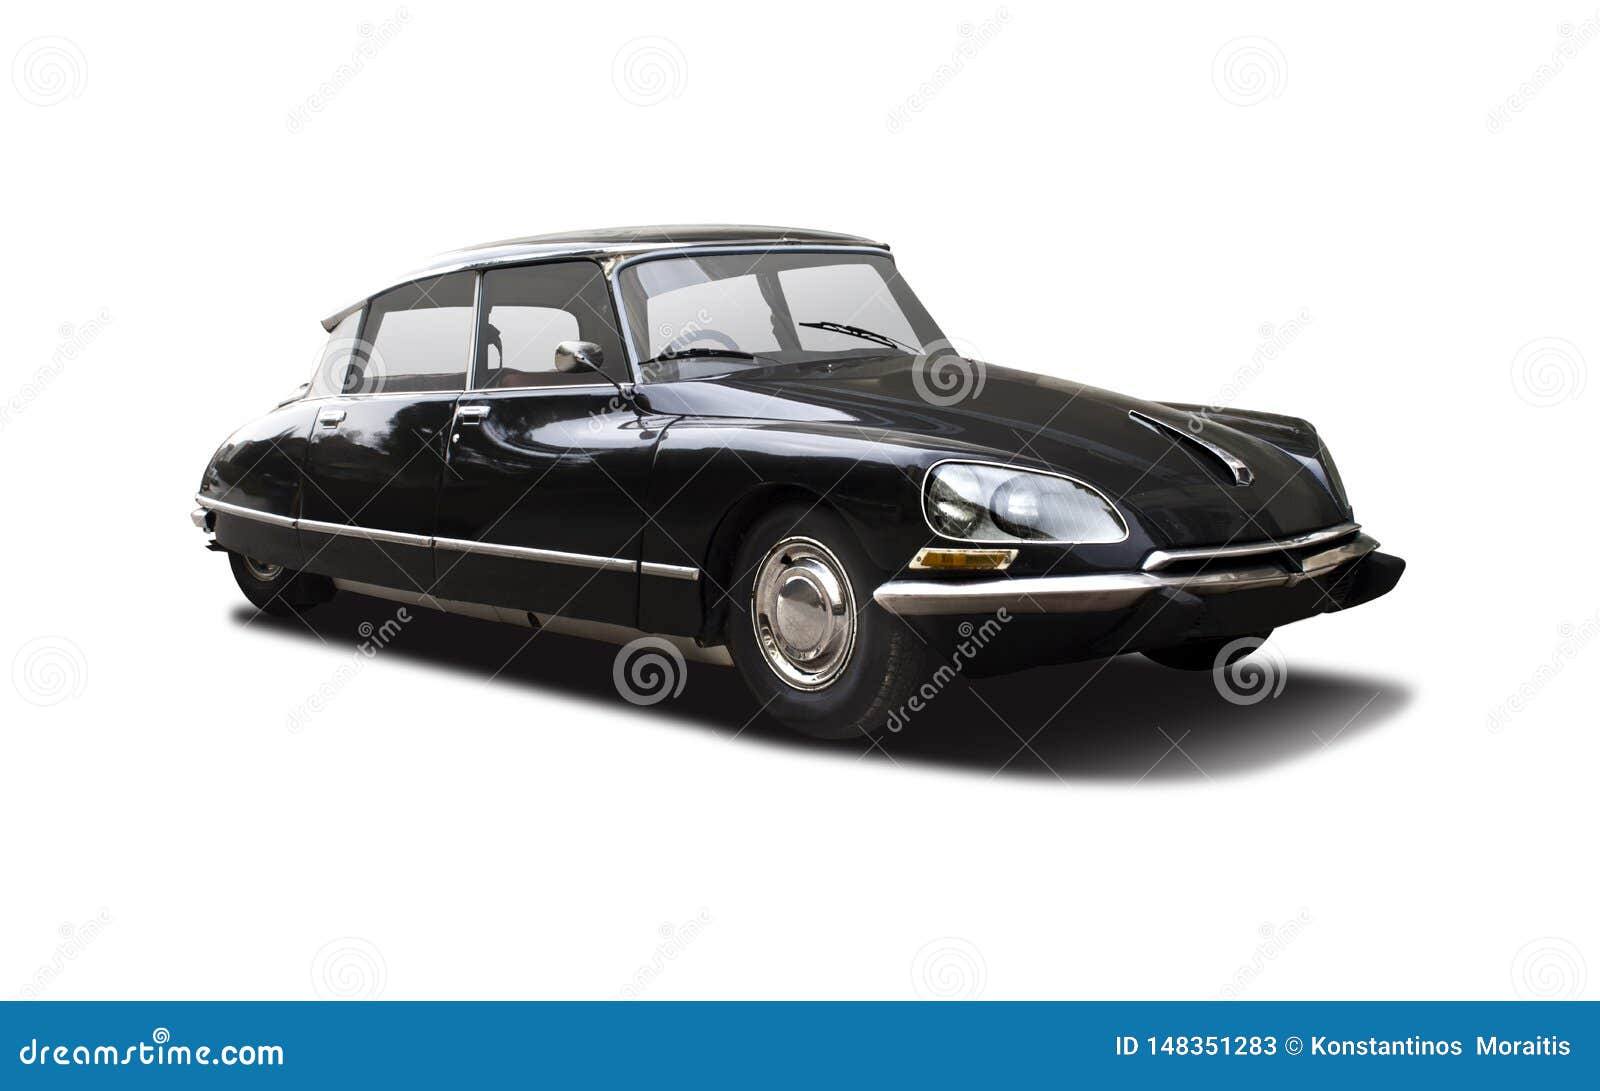 classic citroen ds front view  on white background